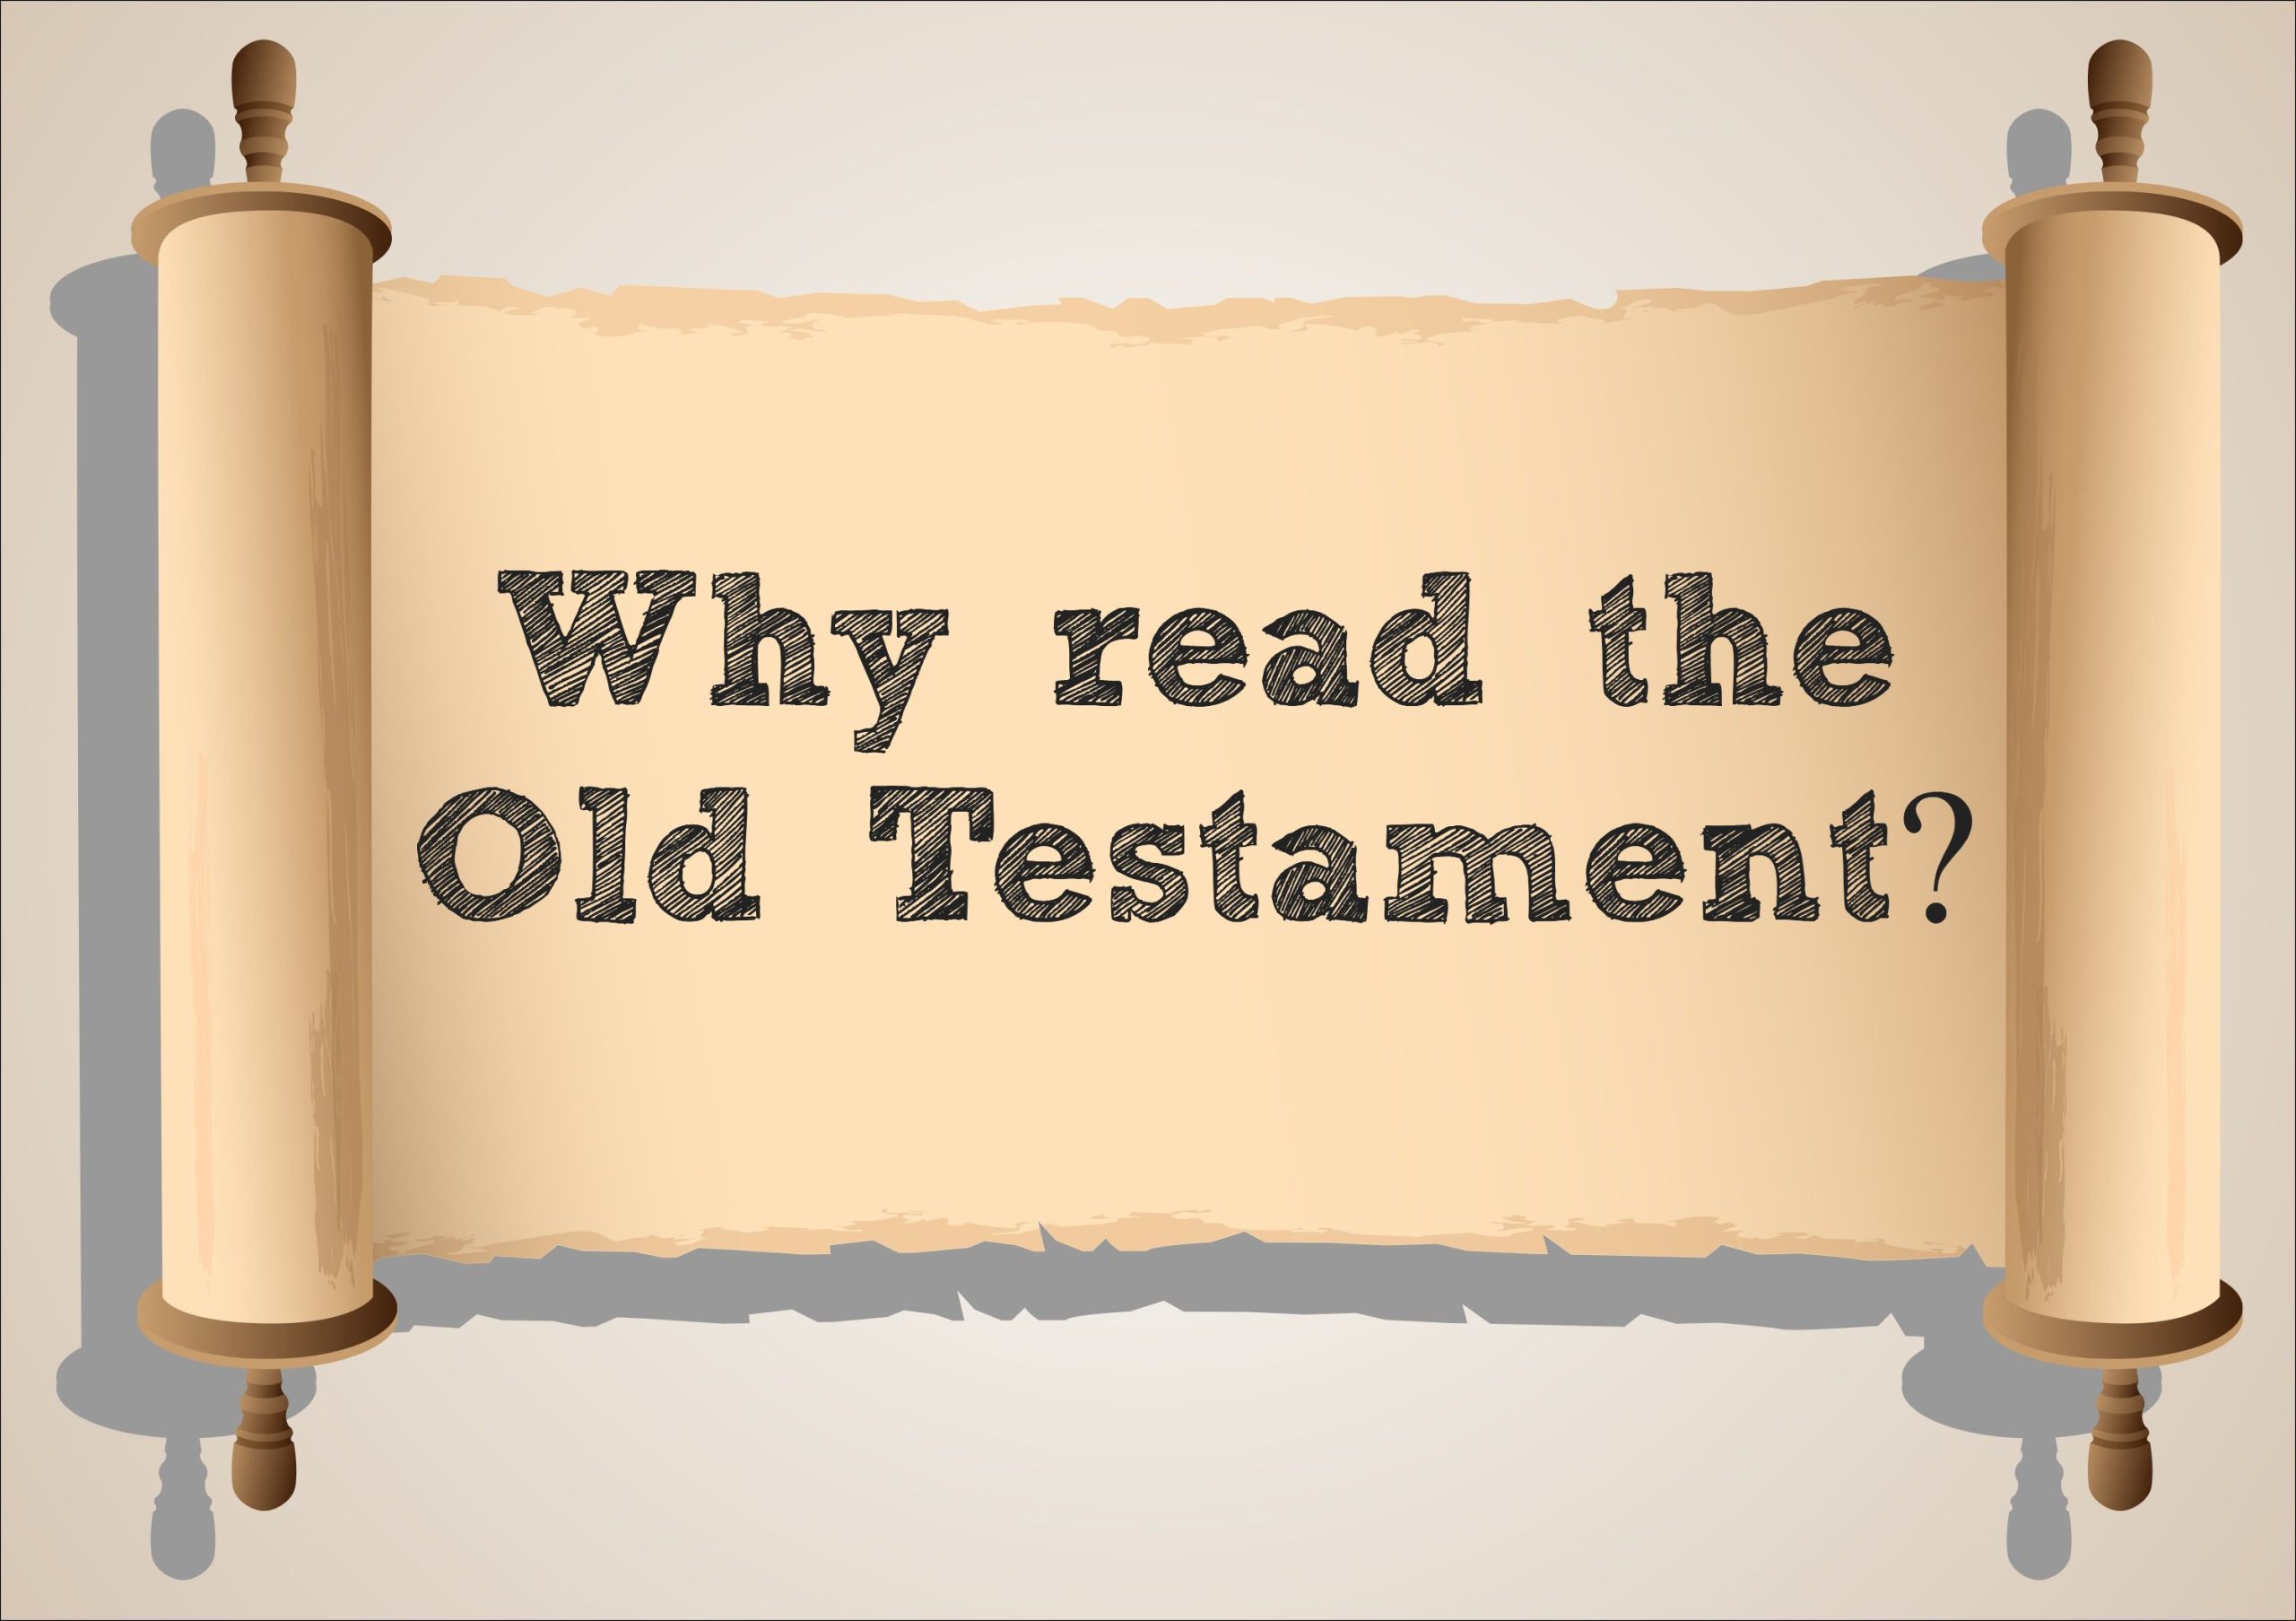 Why read the Old Testament?